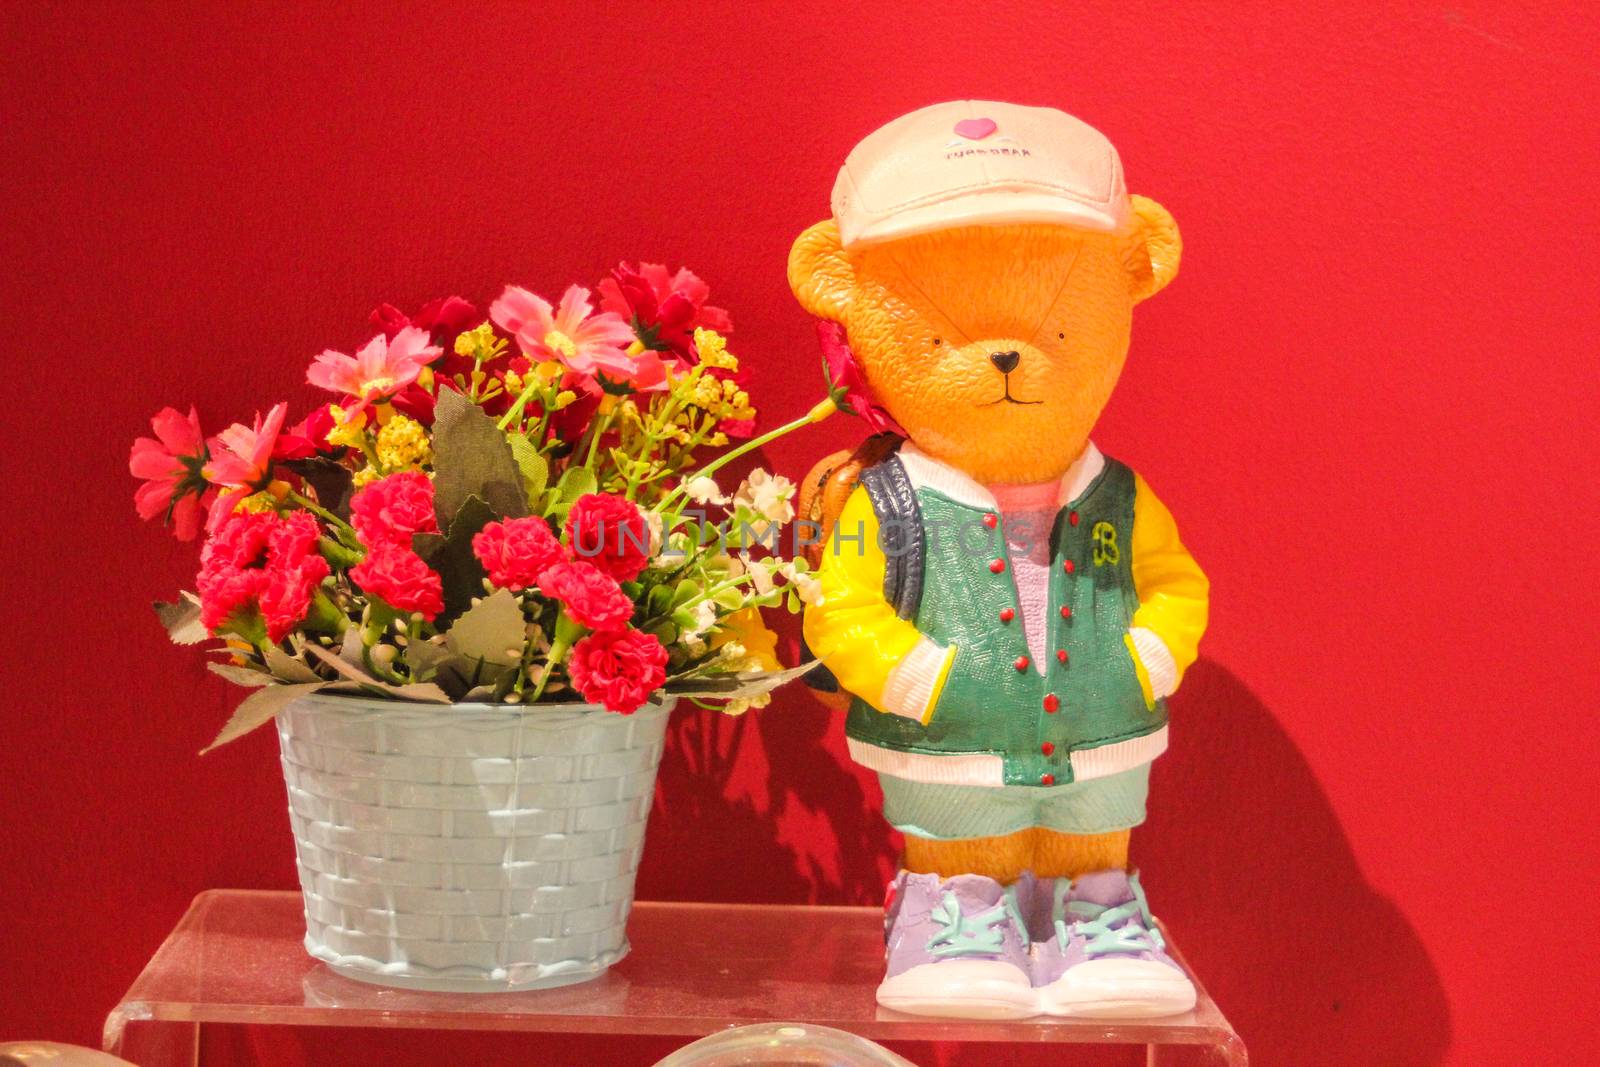 took this photo from my lovely friend store. Happy valentine day for everyone. Rose bear and glass for your love.